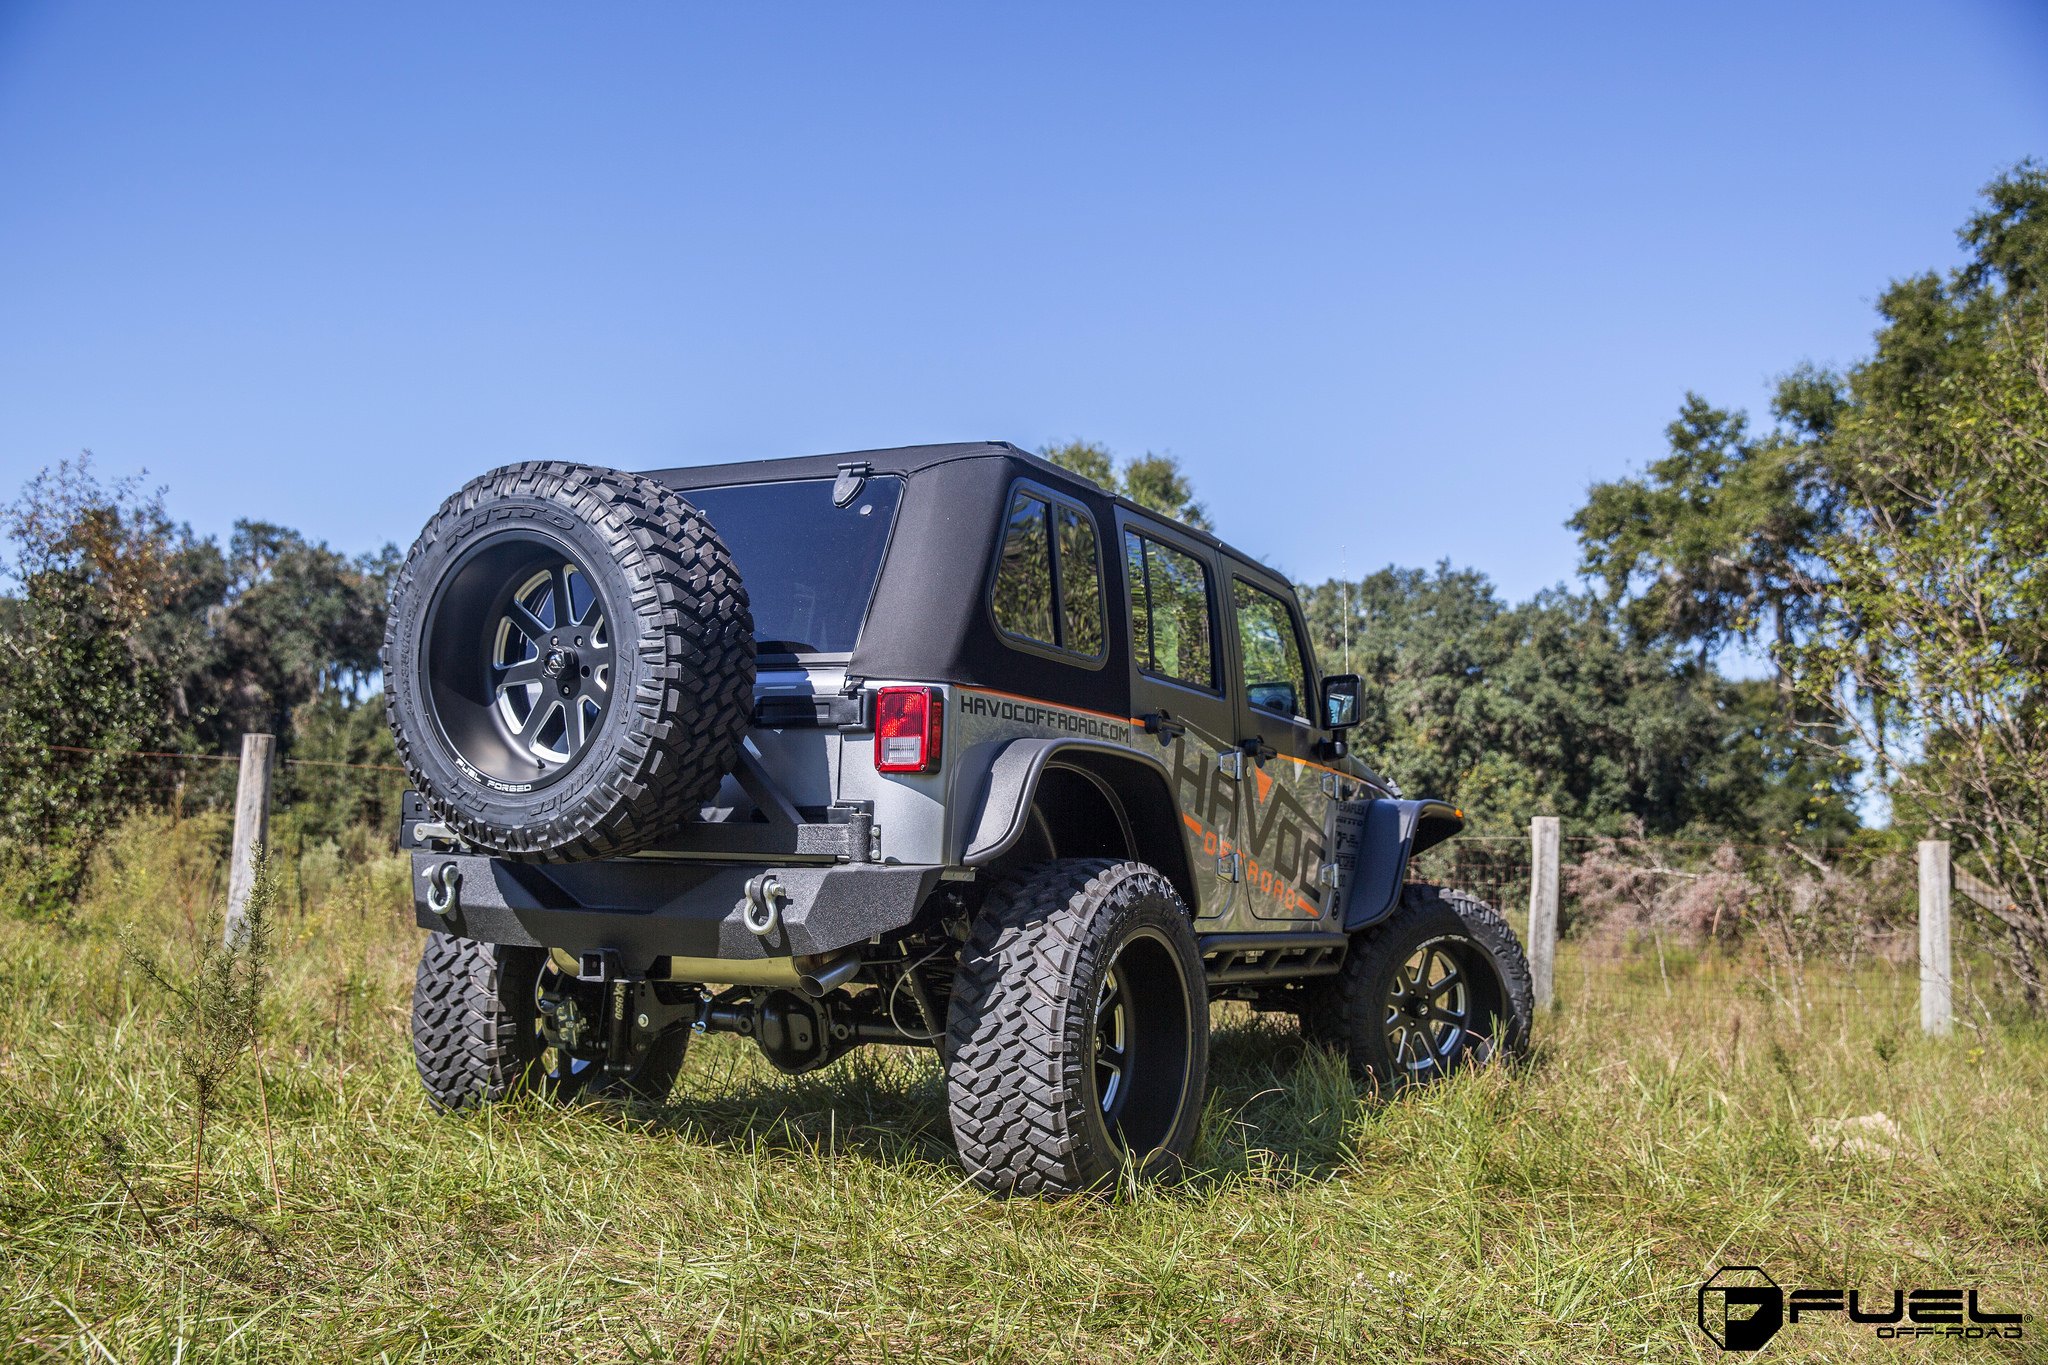 Gray Jeep Wrangler with Aftermarket Rear Bumper - Photo by Fuel Offroad